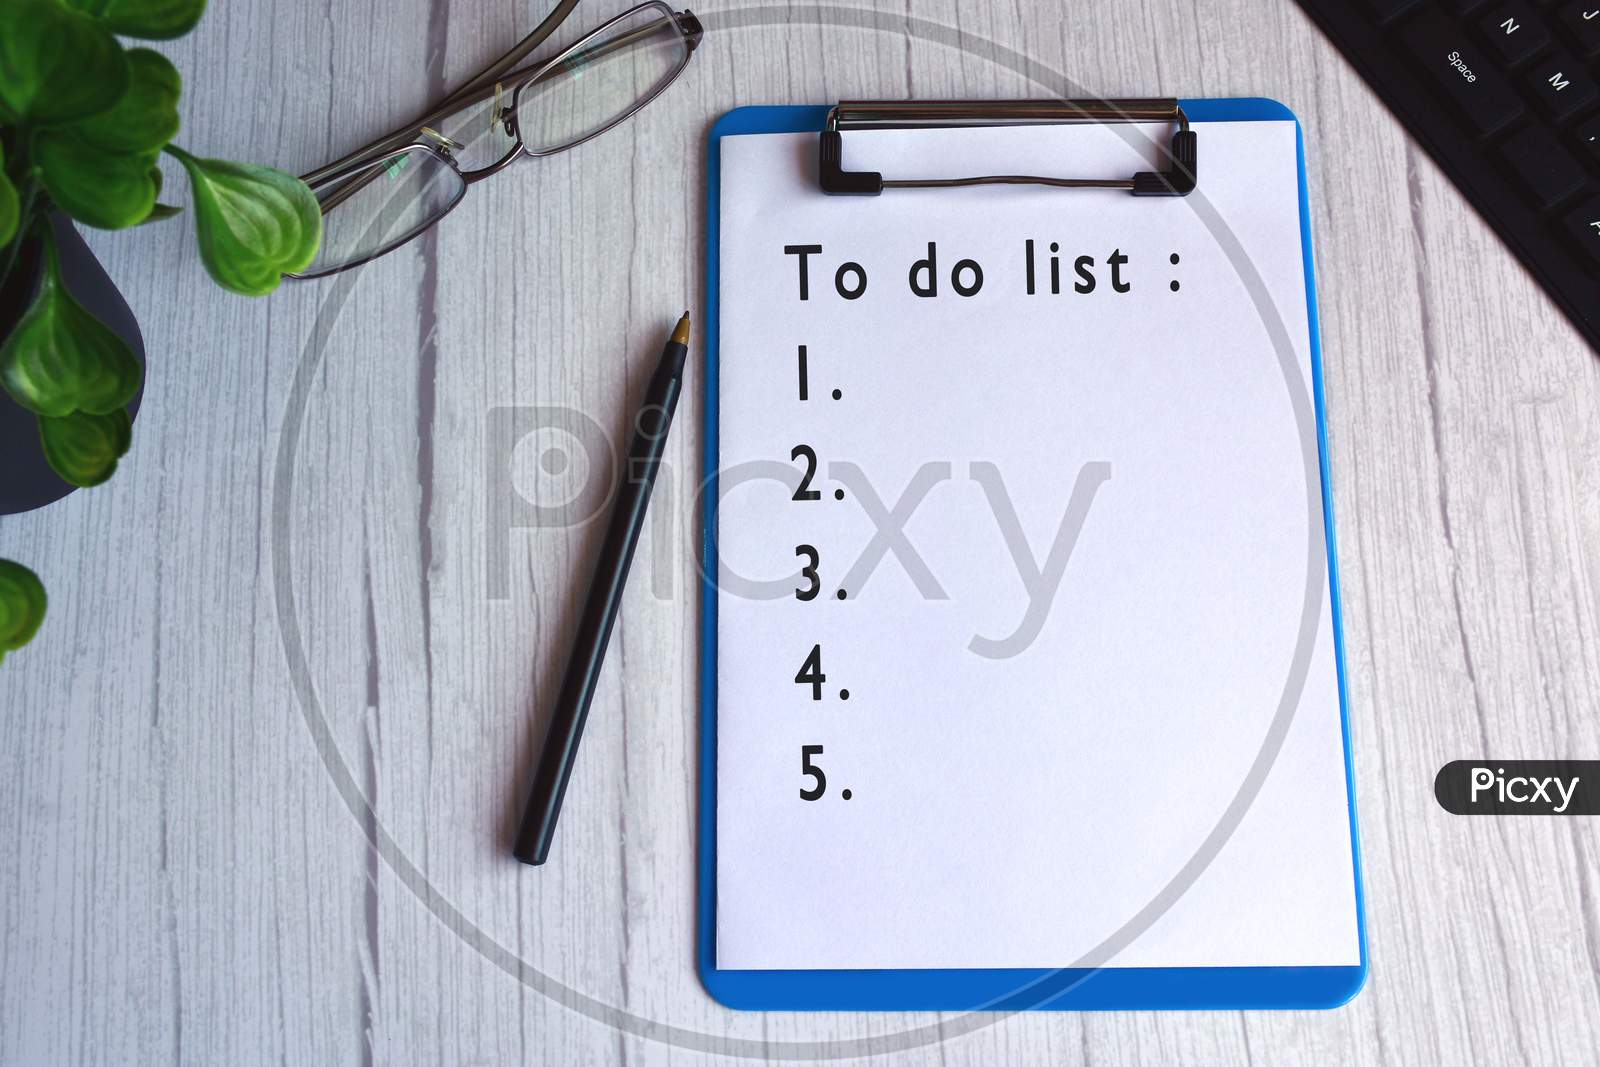 To do list text on blue clip board with glasses, pen, plant and keyboard on wooden desk.